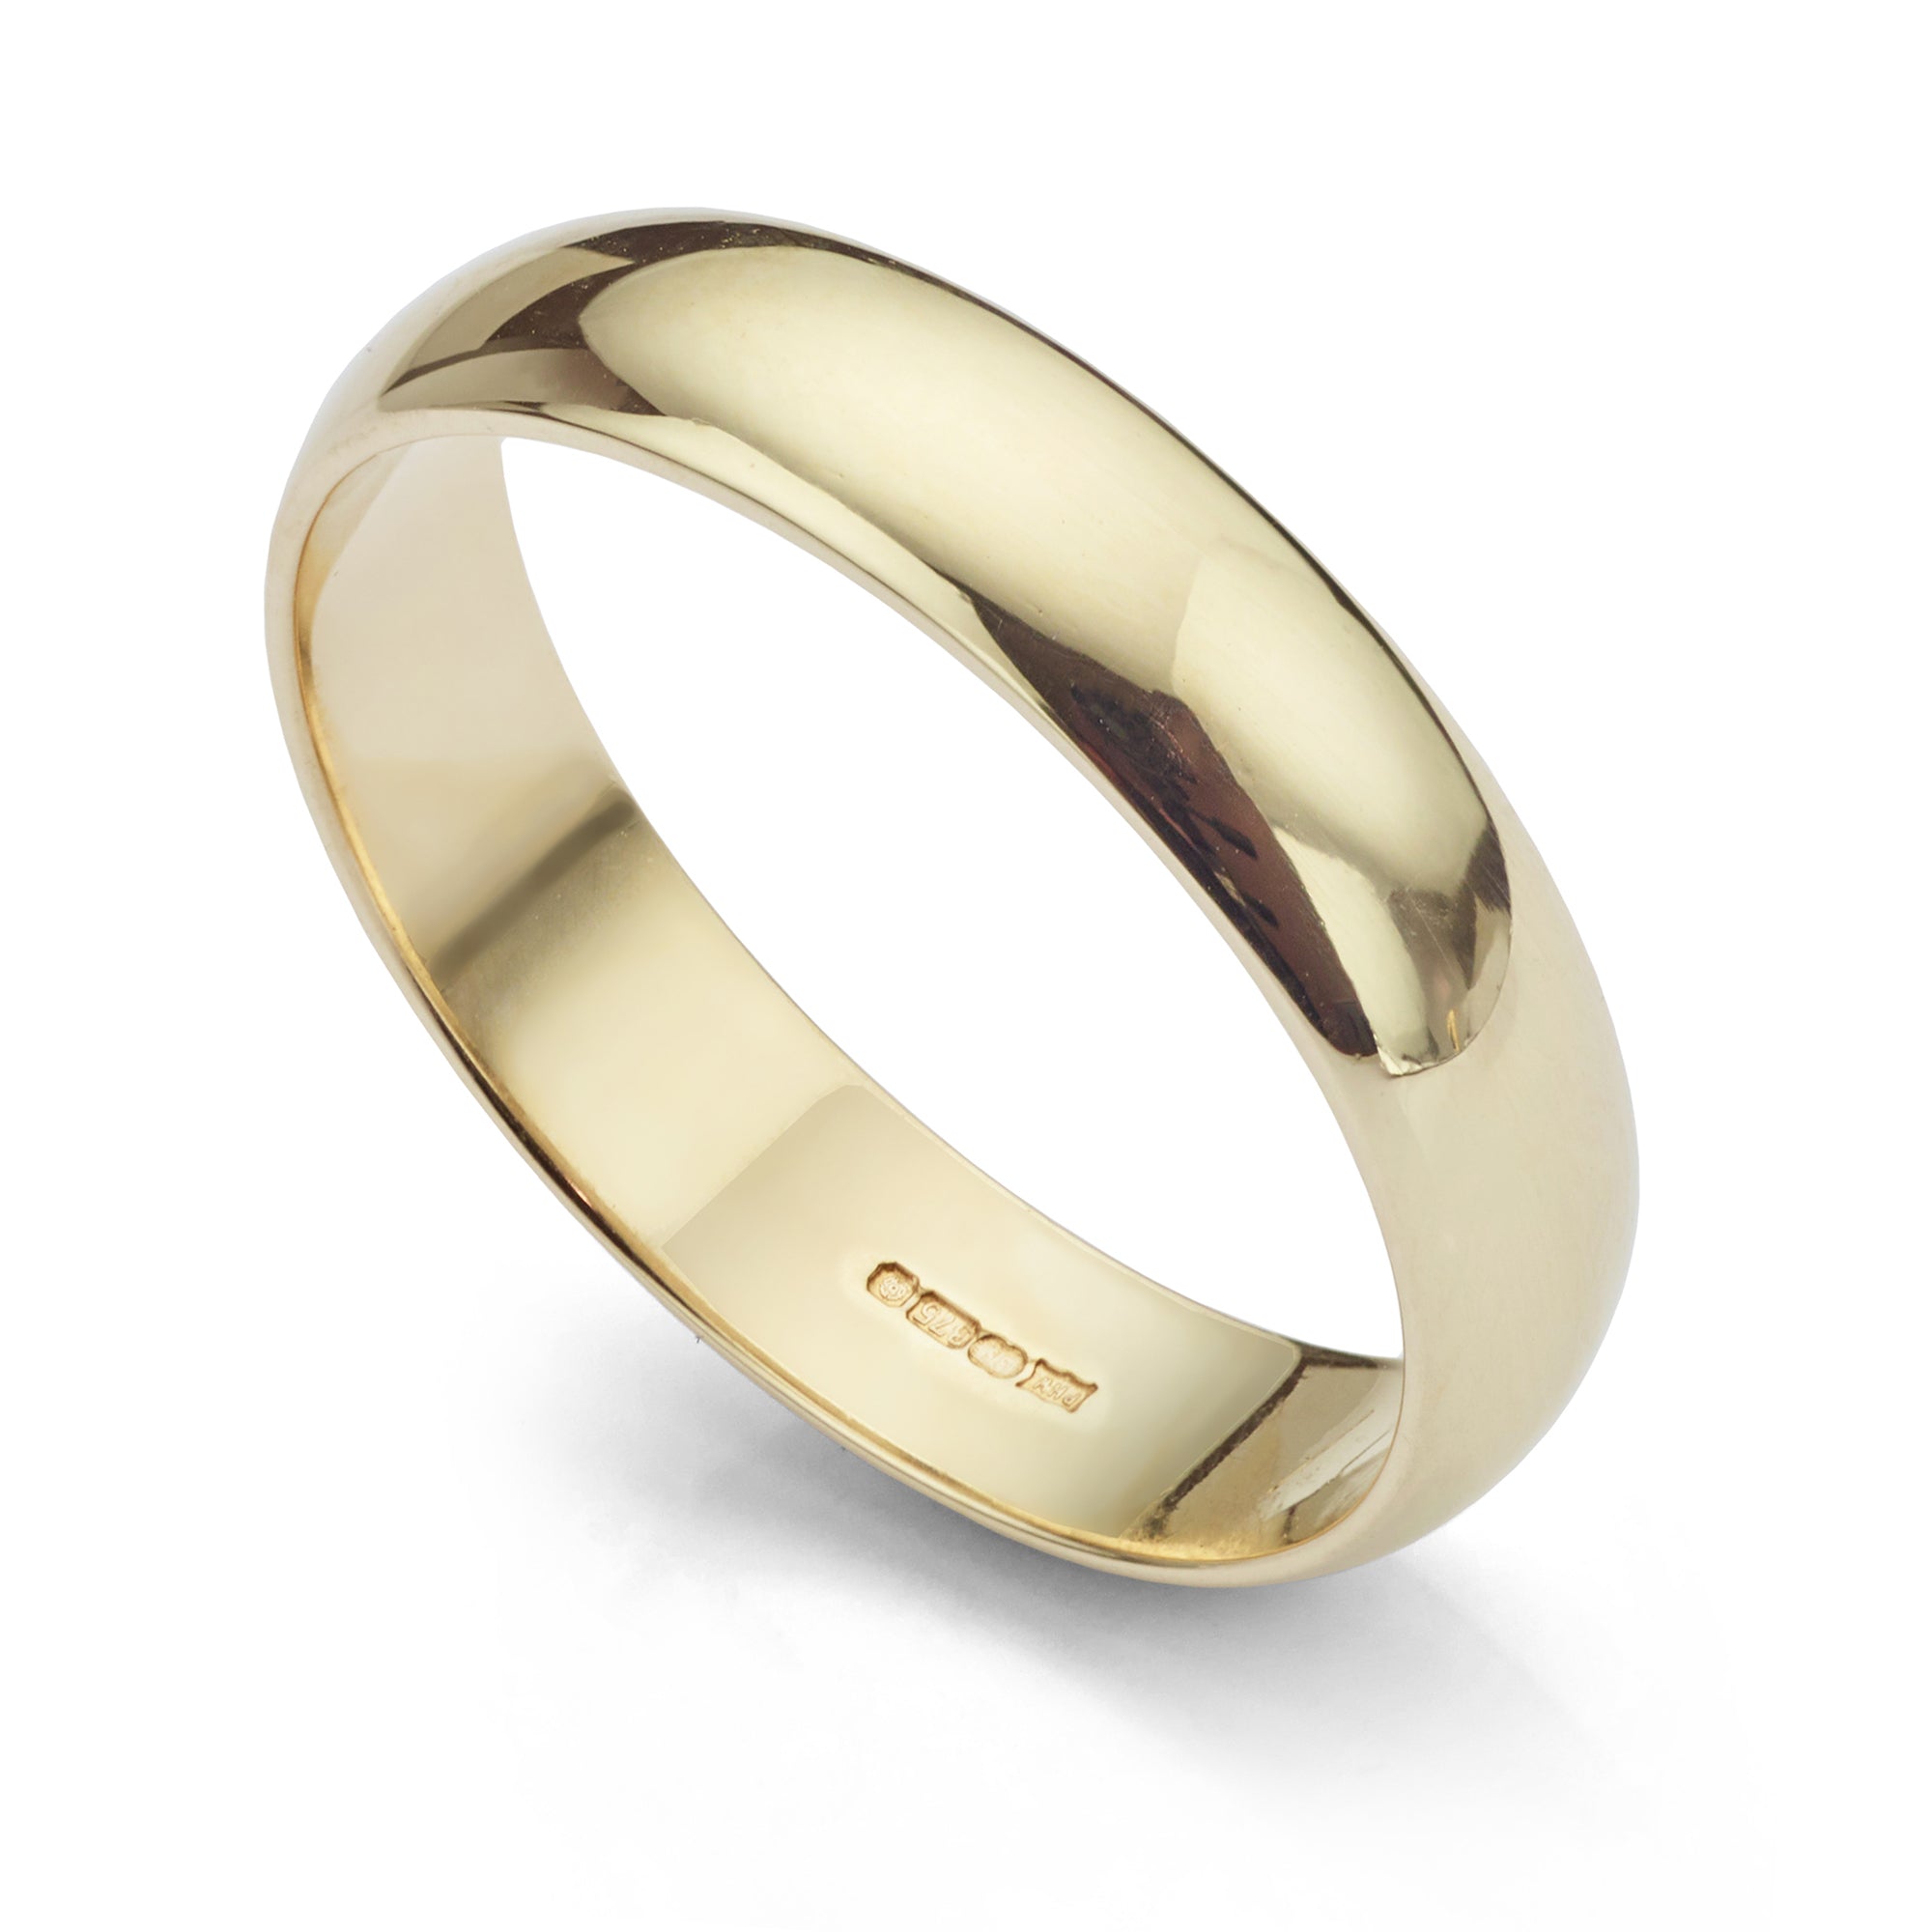 Pre-owned 5mm yellow gold wedding ring